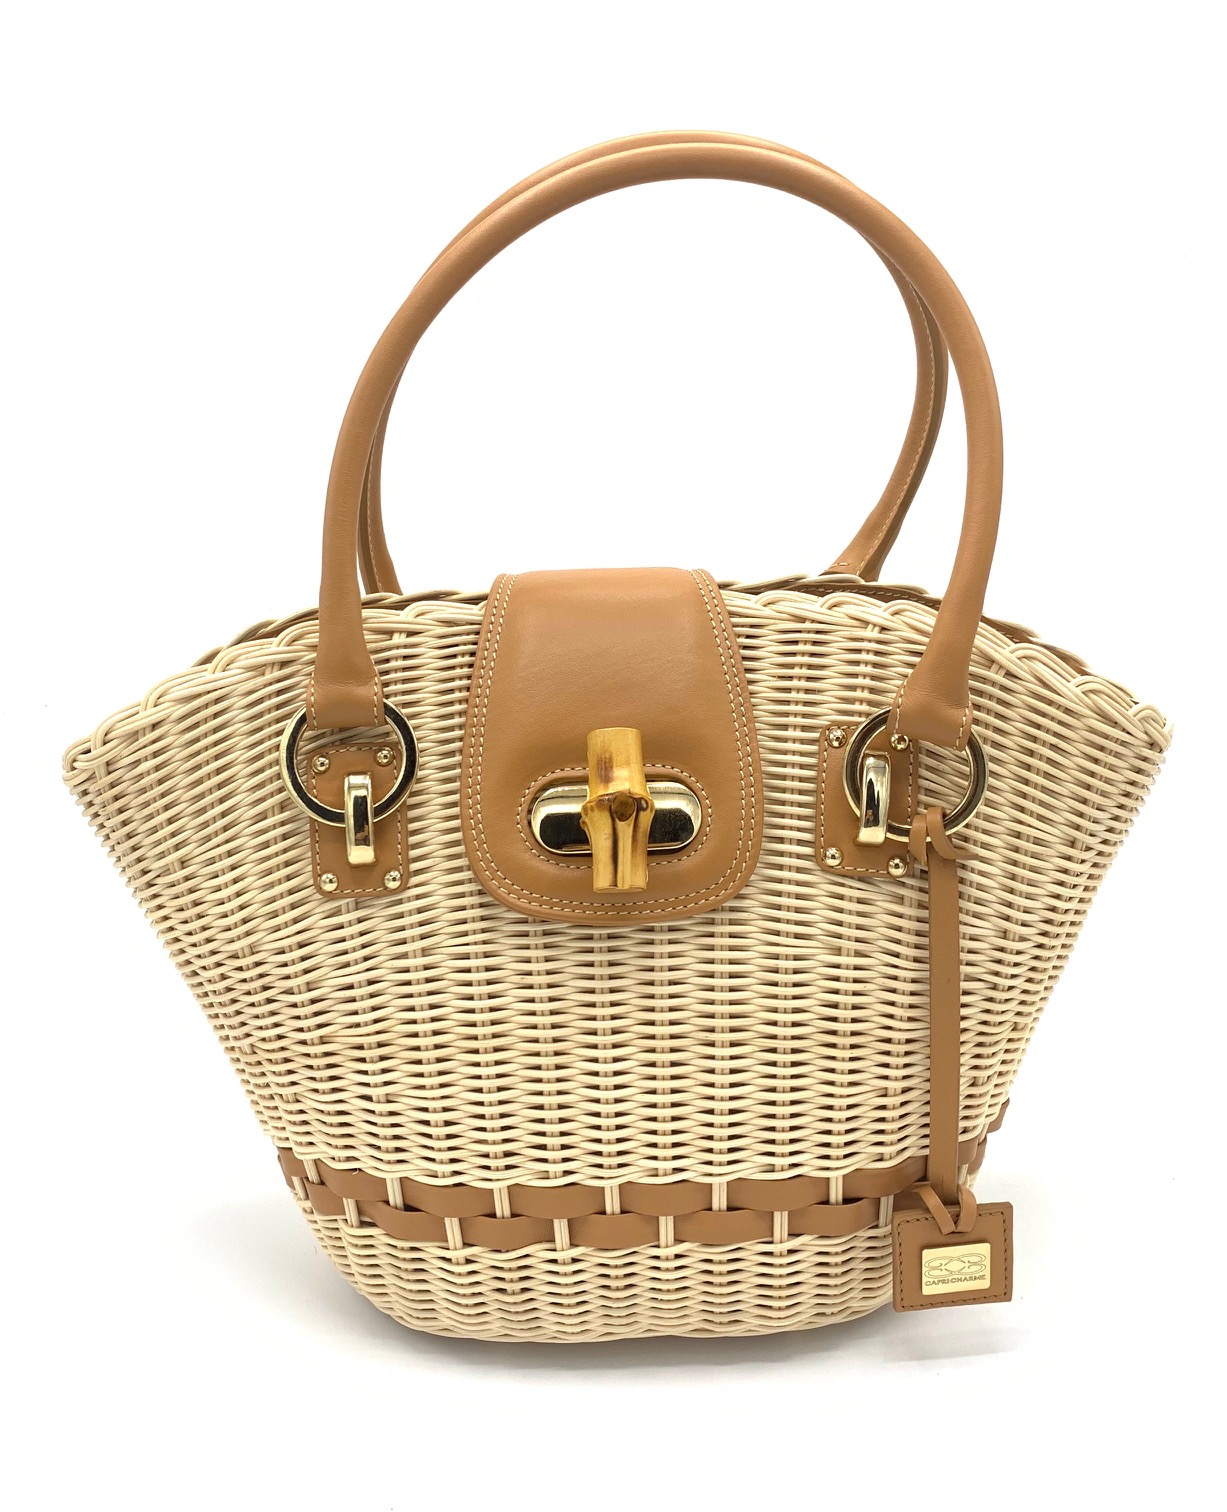 Tote bag Saint Martin in natural wicker/toffee